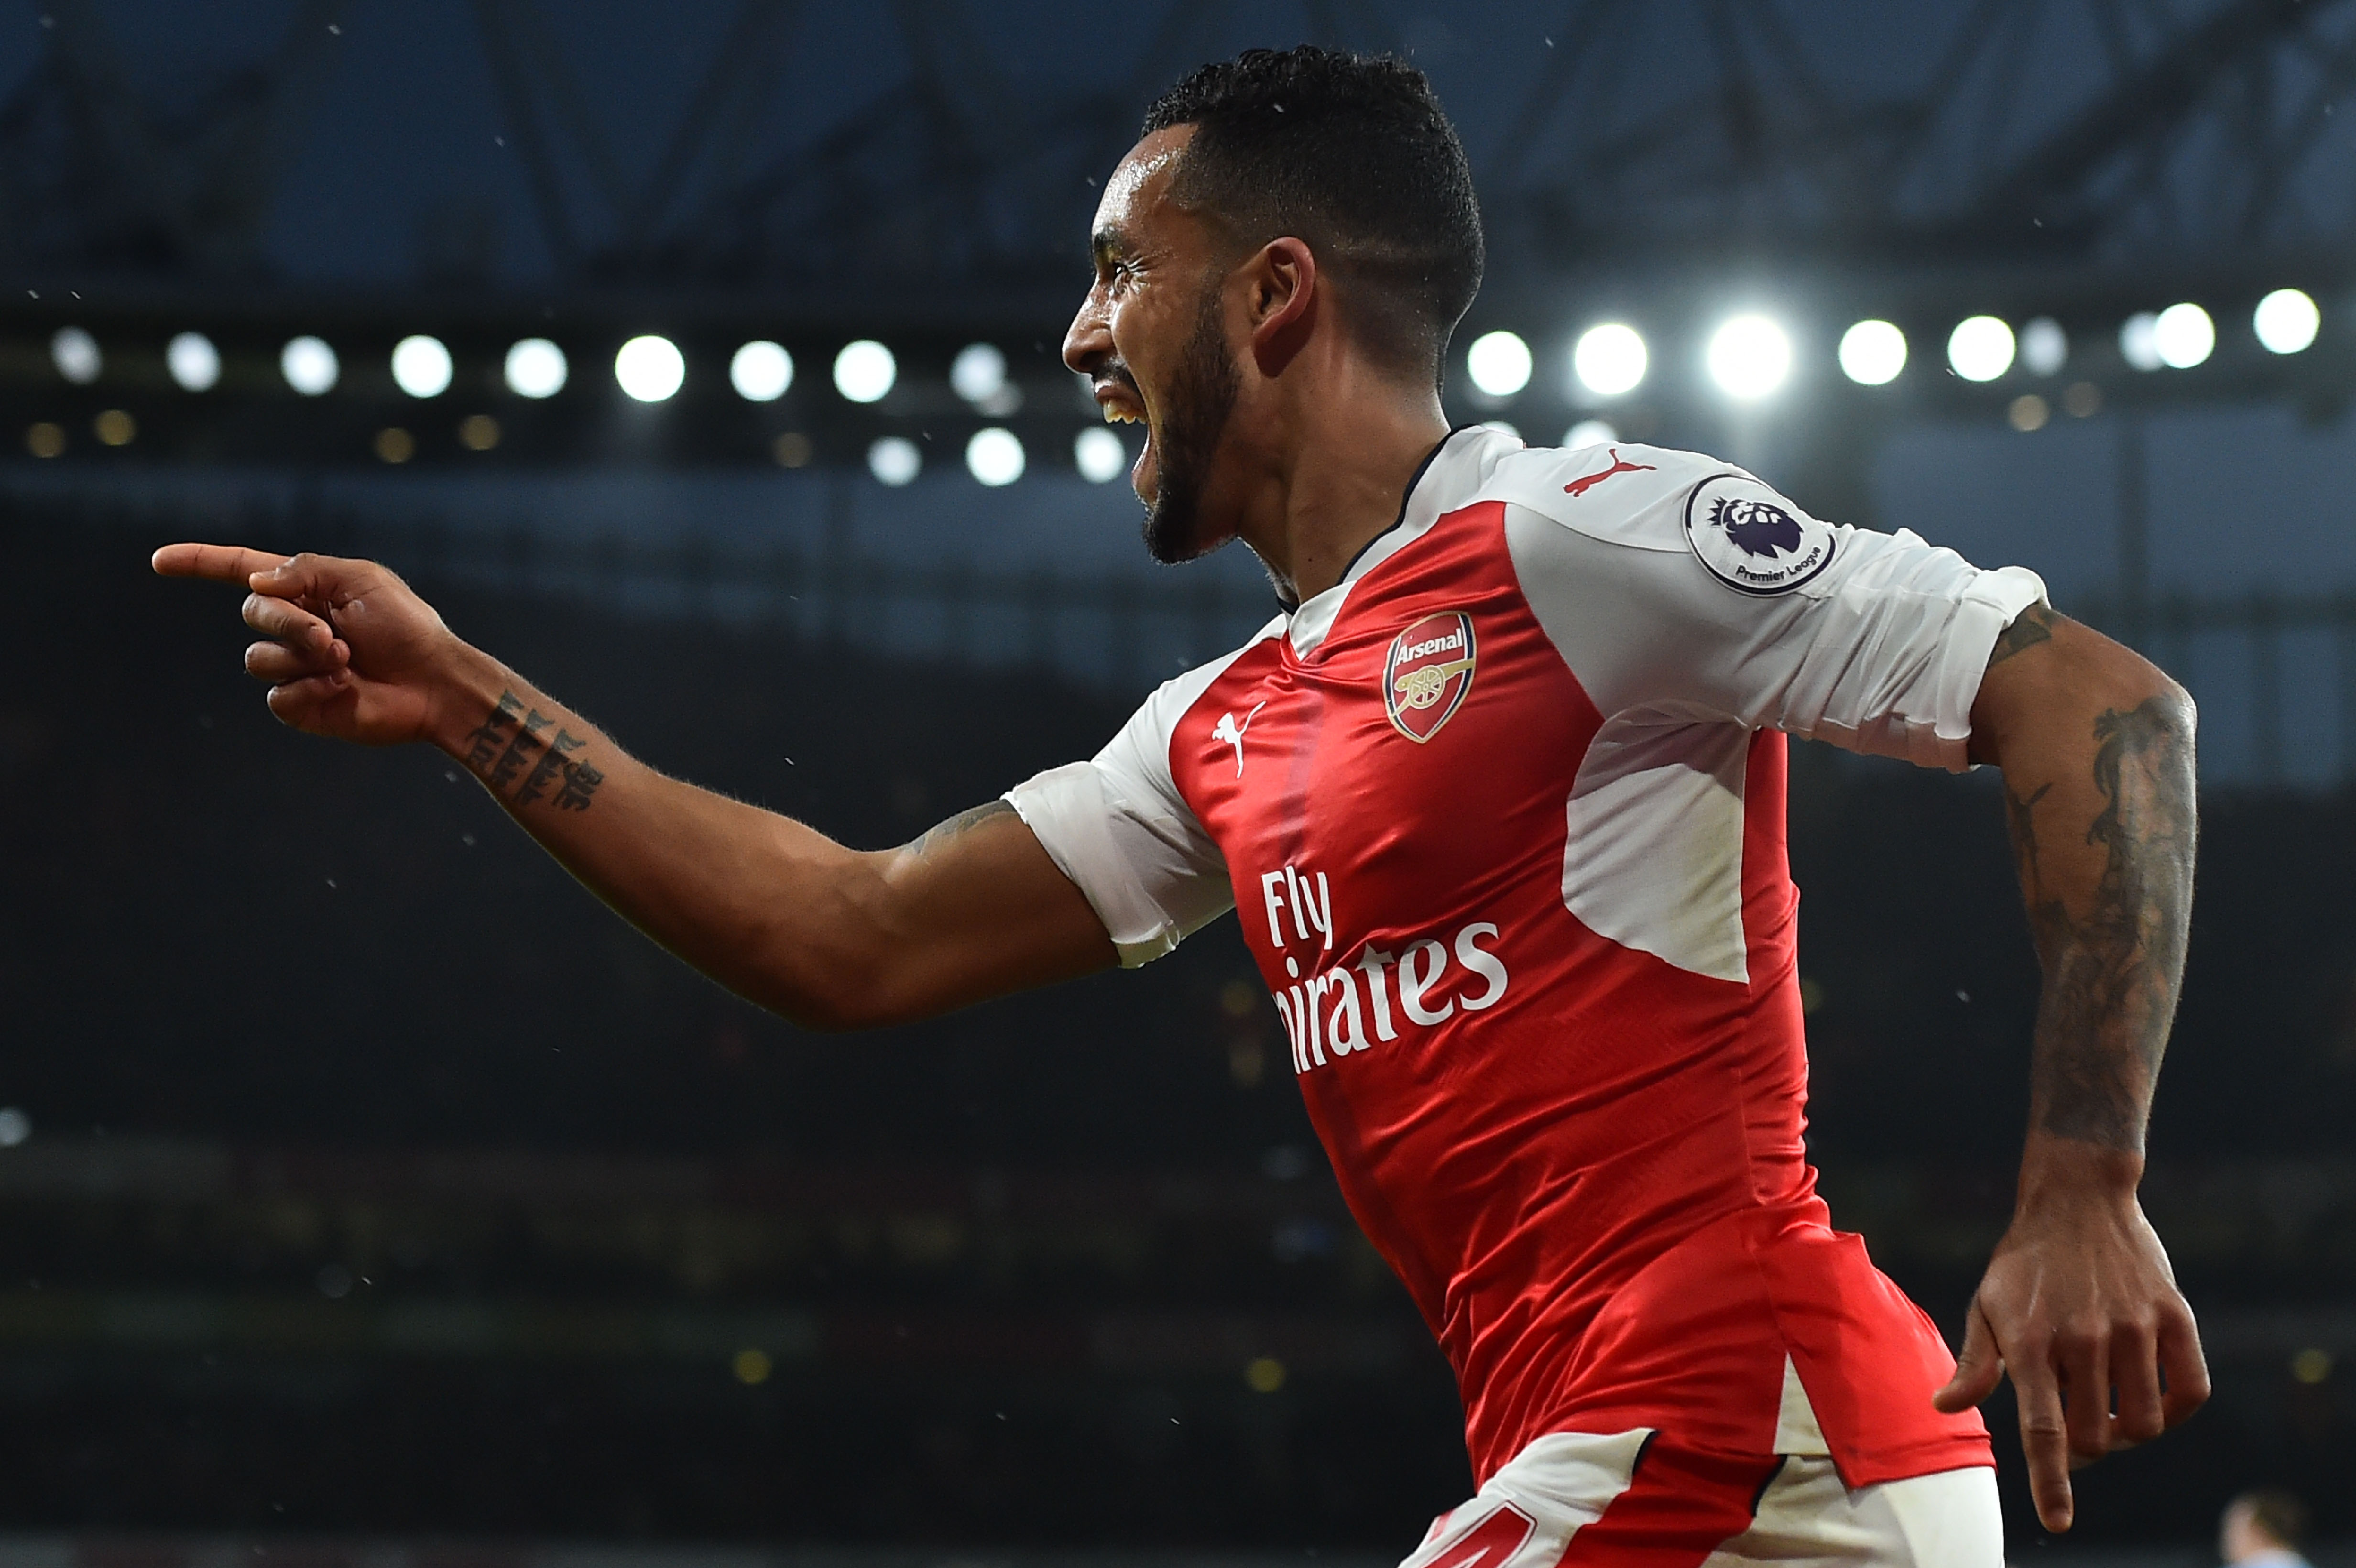 Theo Walcott scored his 100th goal in club football to help Arsenal to a 3-1 win in the reverse fixture. (Photo courtesy - Glyn Kirk/AFP/Getty Images)